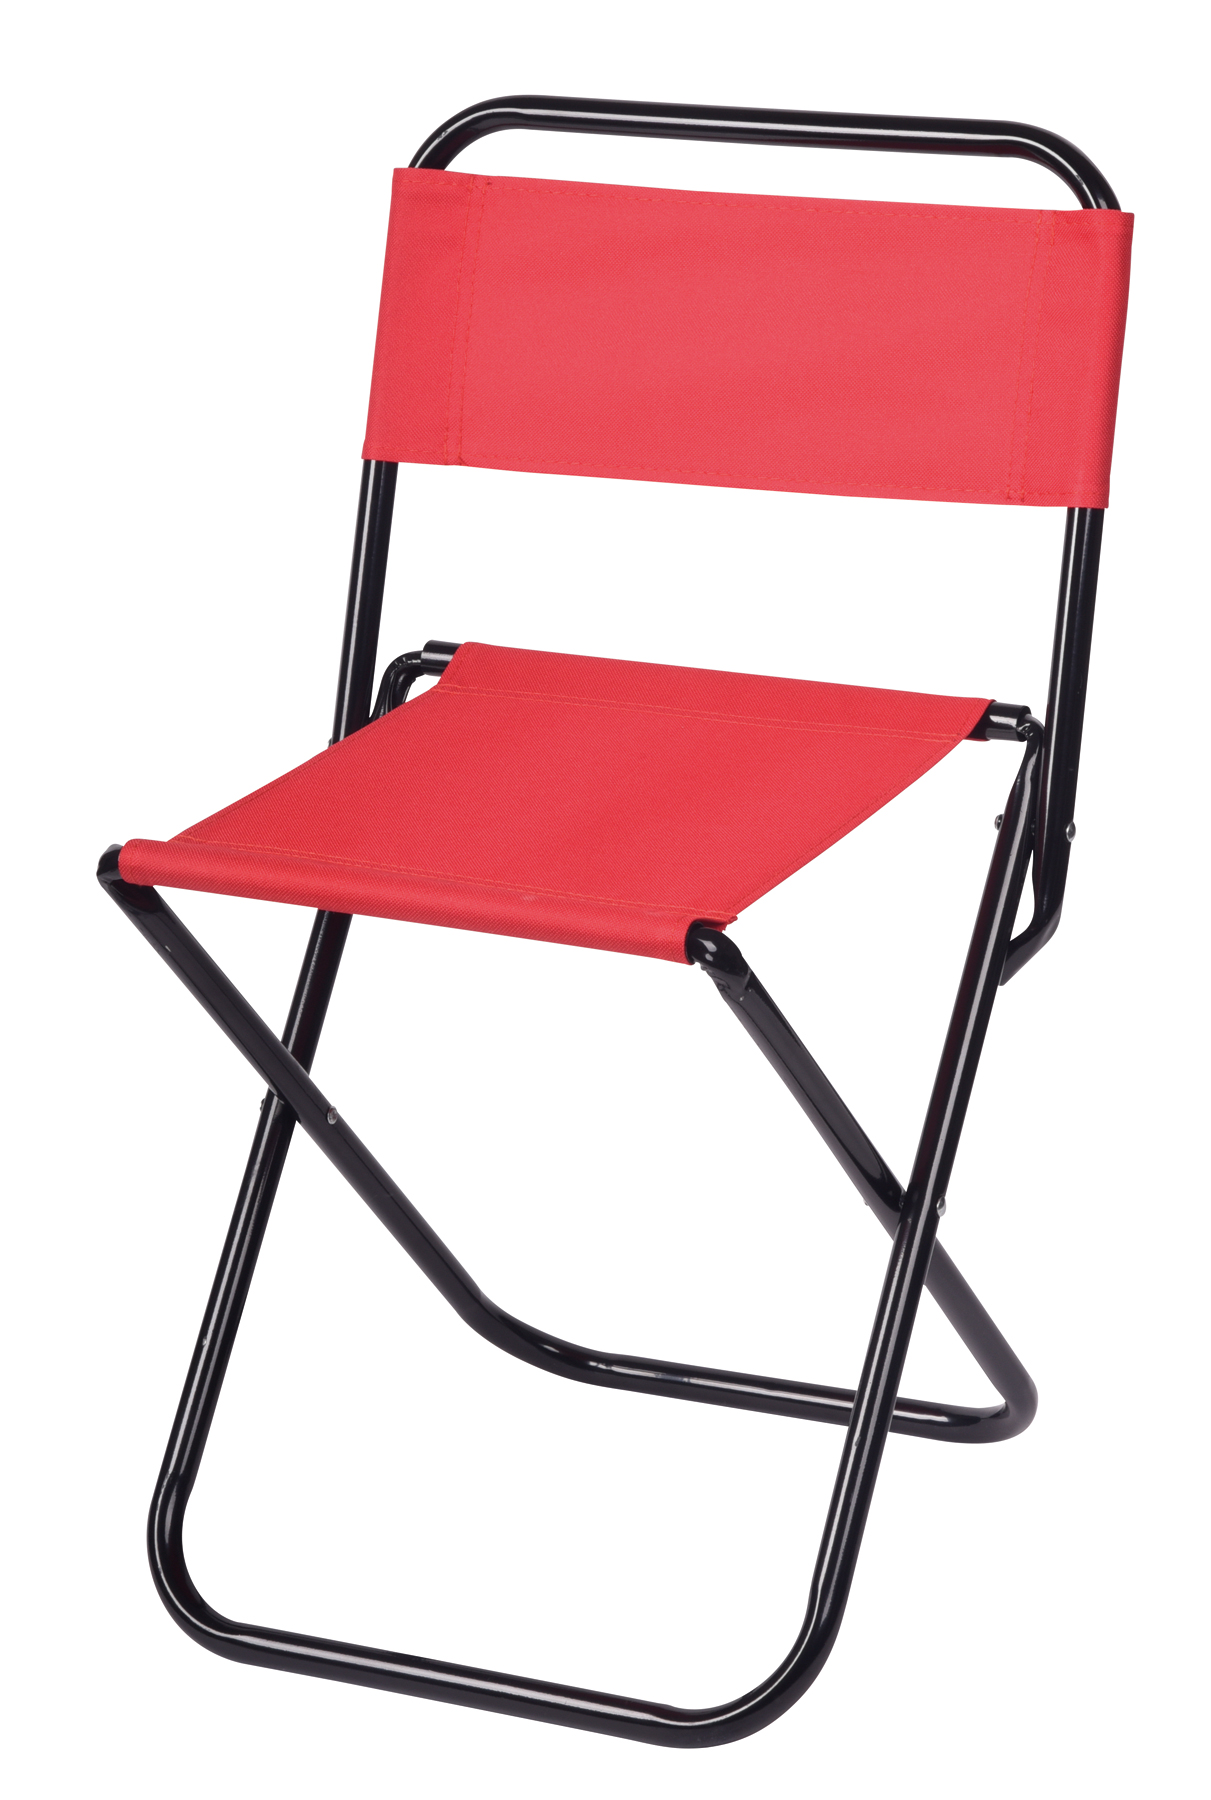 Folding camping chair TAKEOUT - red